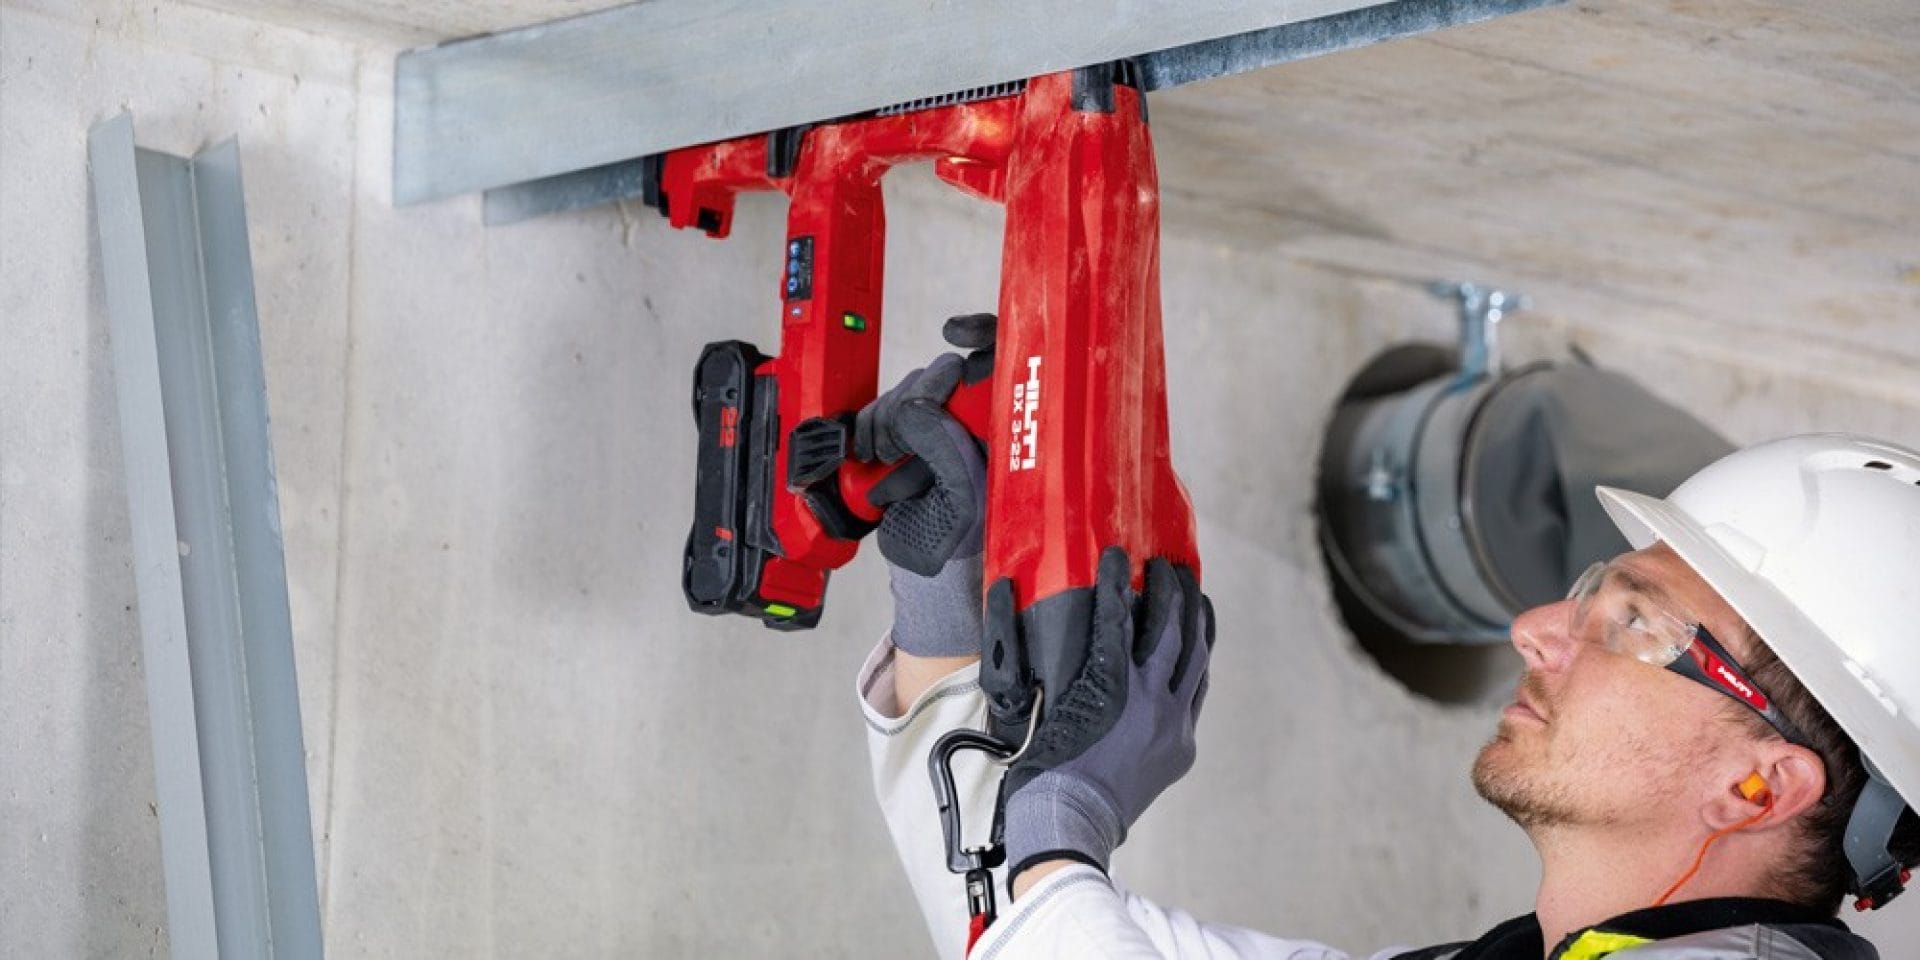 A drywall rail is attached to the ceiling using the Hilti Nuron BX 3-22